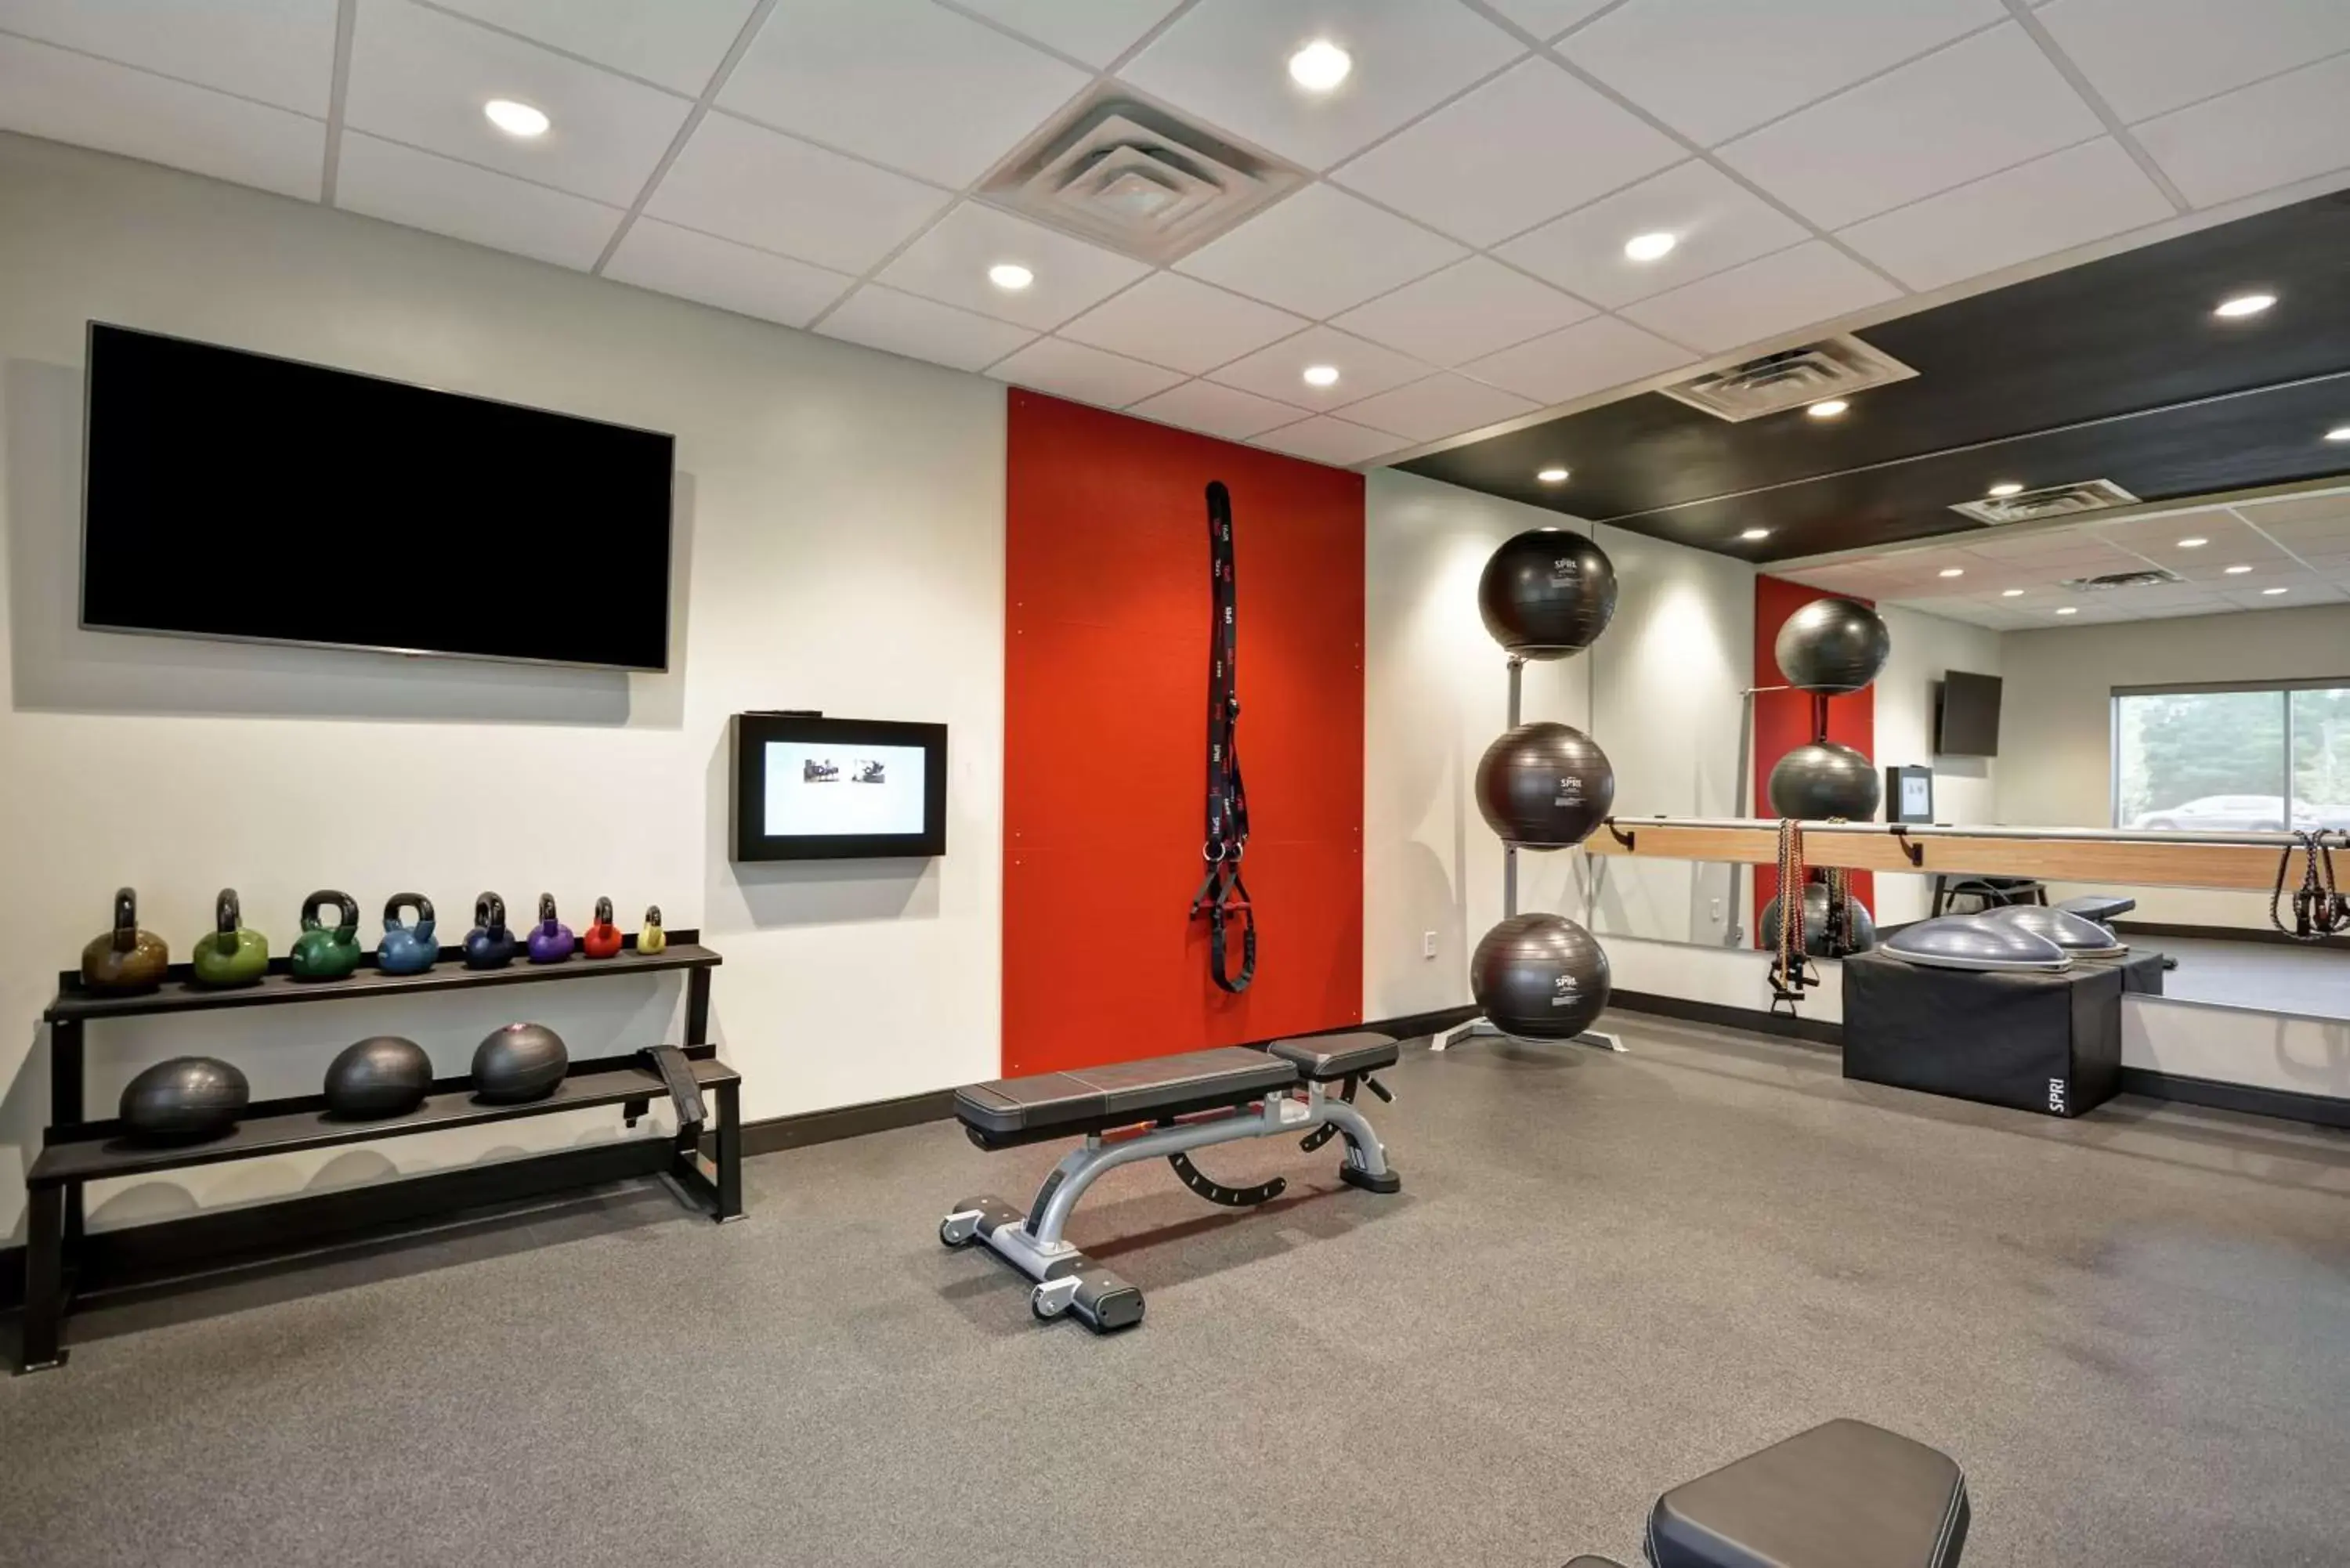 Fitness centre/facilities, Fitness Center/Facilities in Tru By Hilton Chicopee Springfield